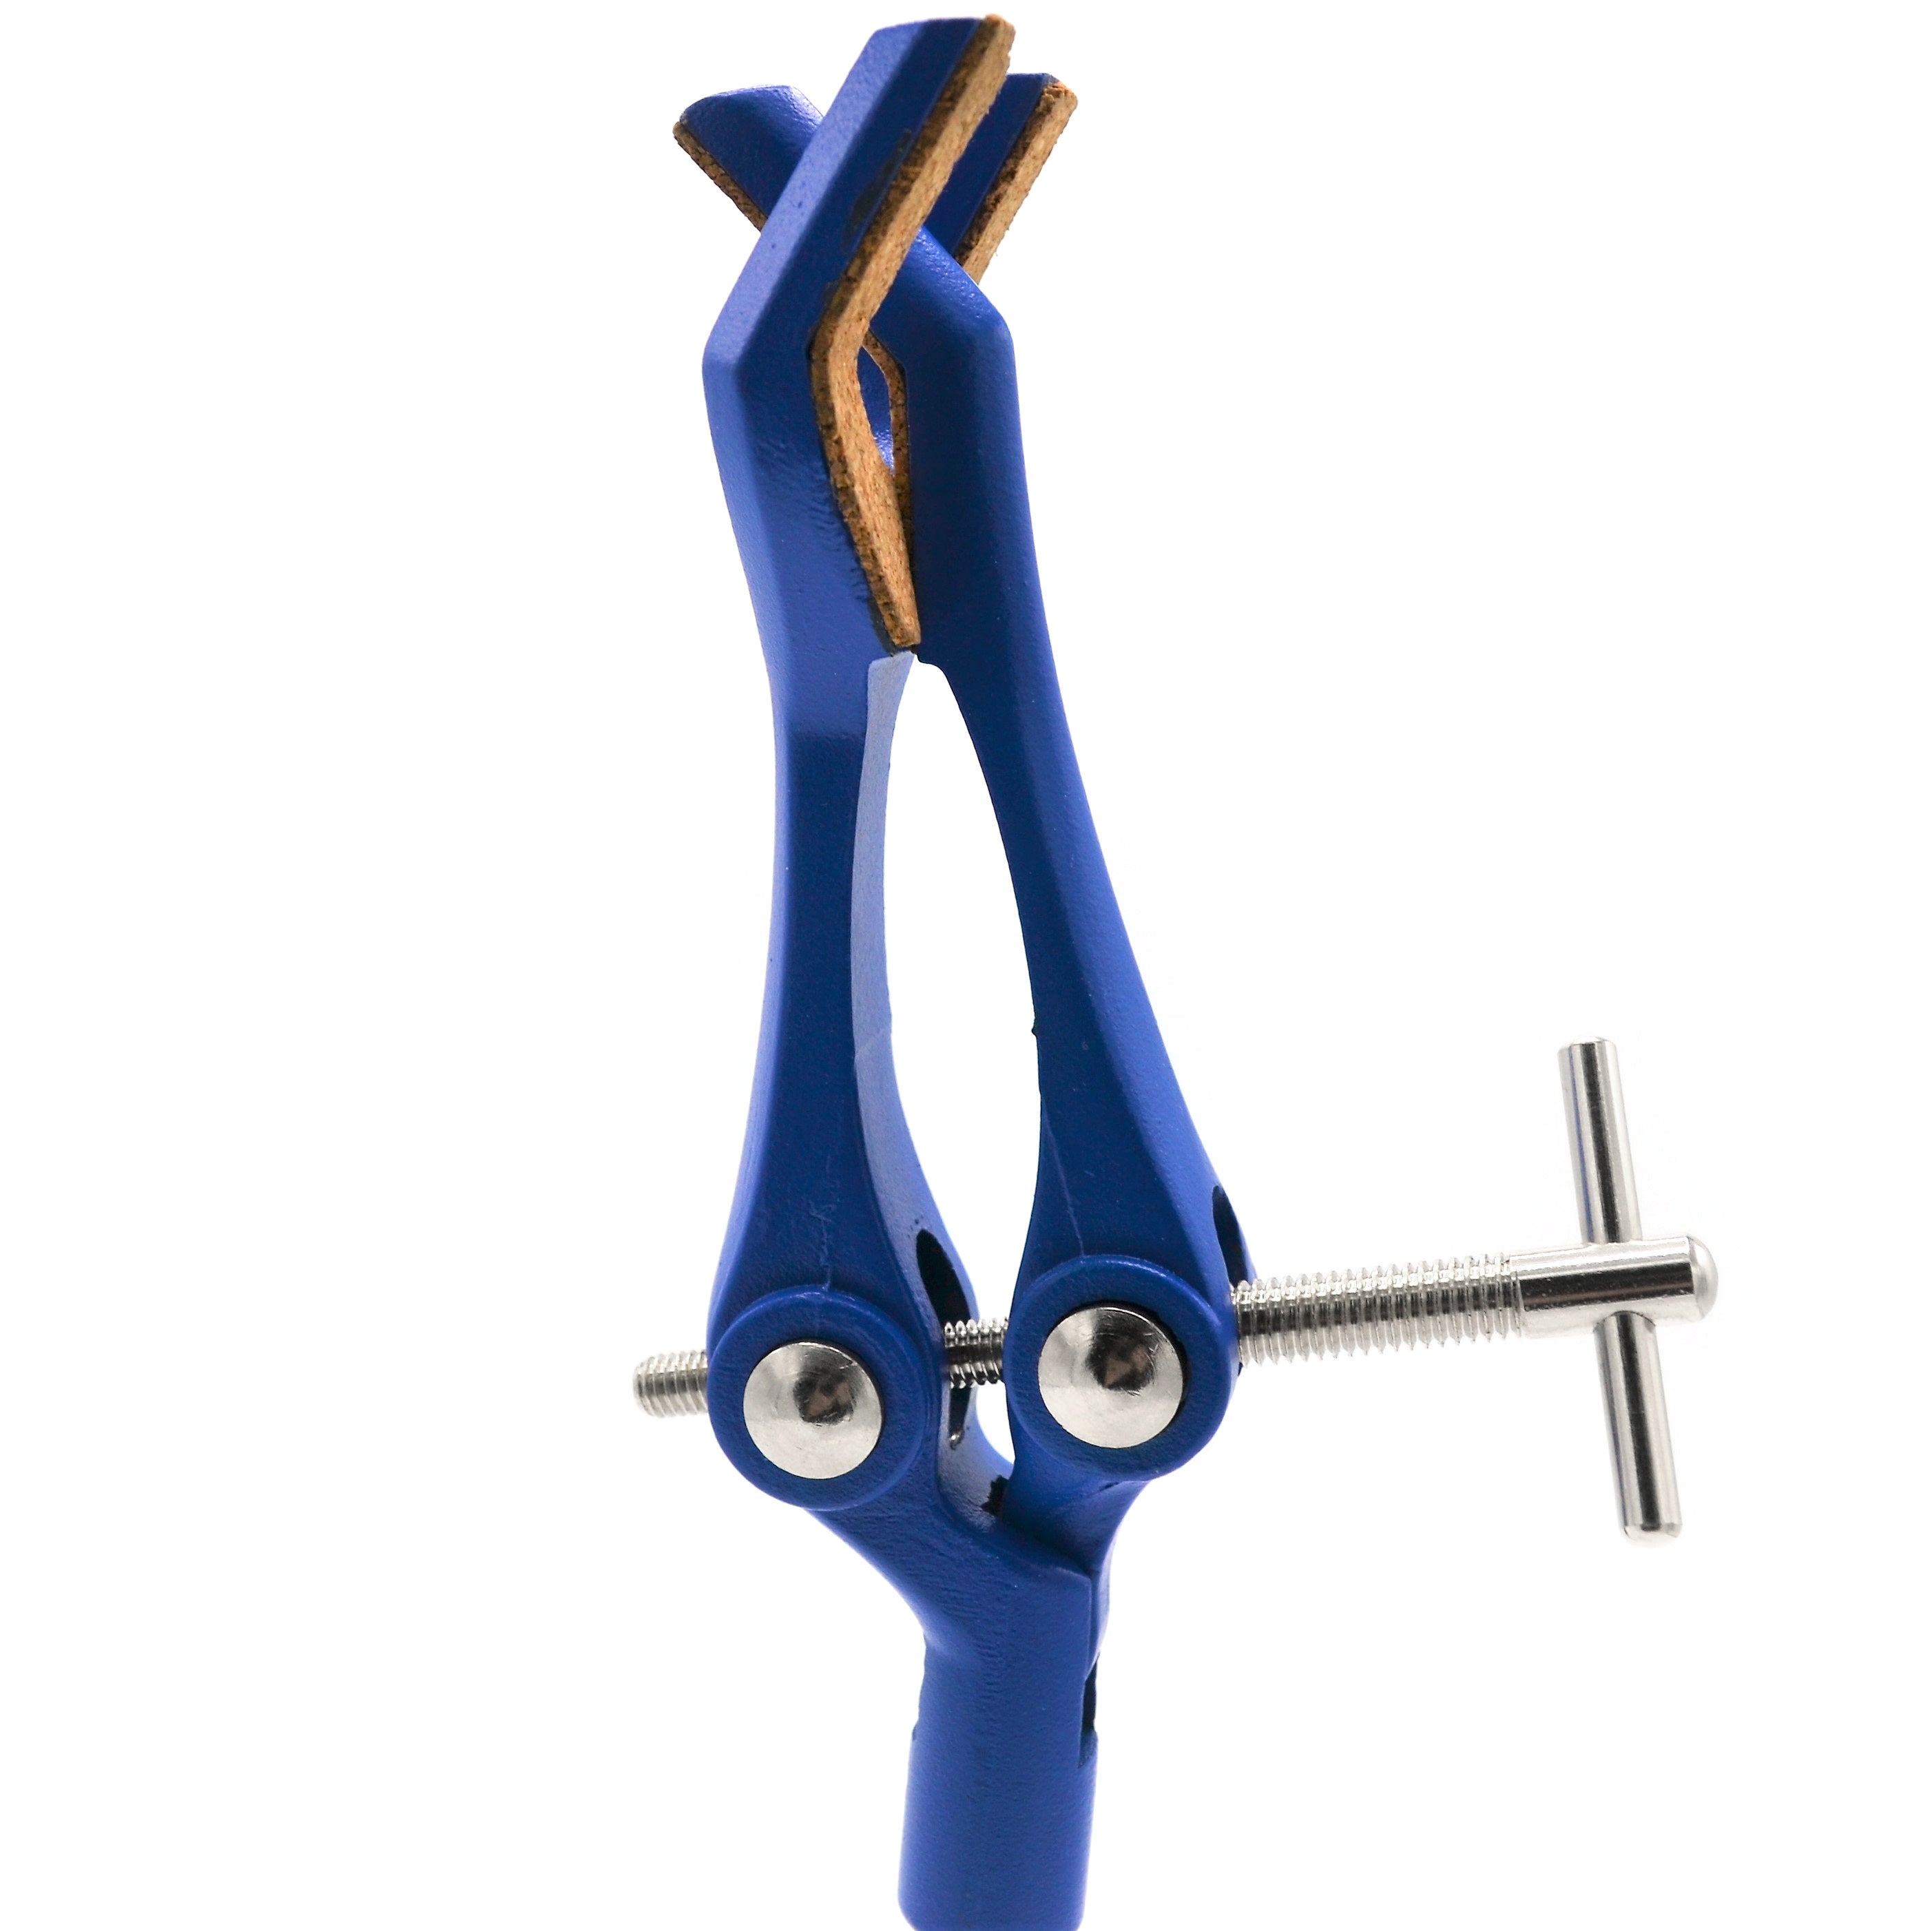 3 Finger, Cork Lined, Lab Clamp with Boss Head,  3.5" (8.9 cm) Maximum Clamp Opening